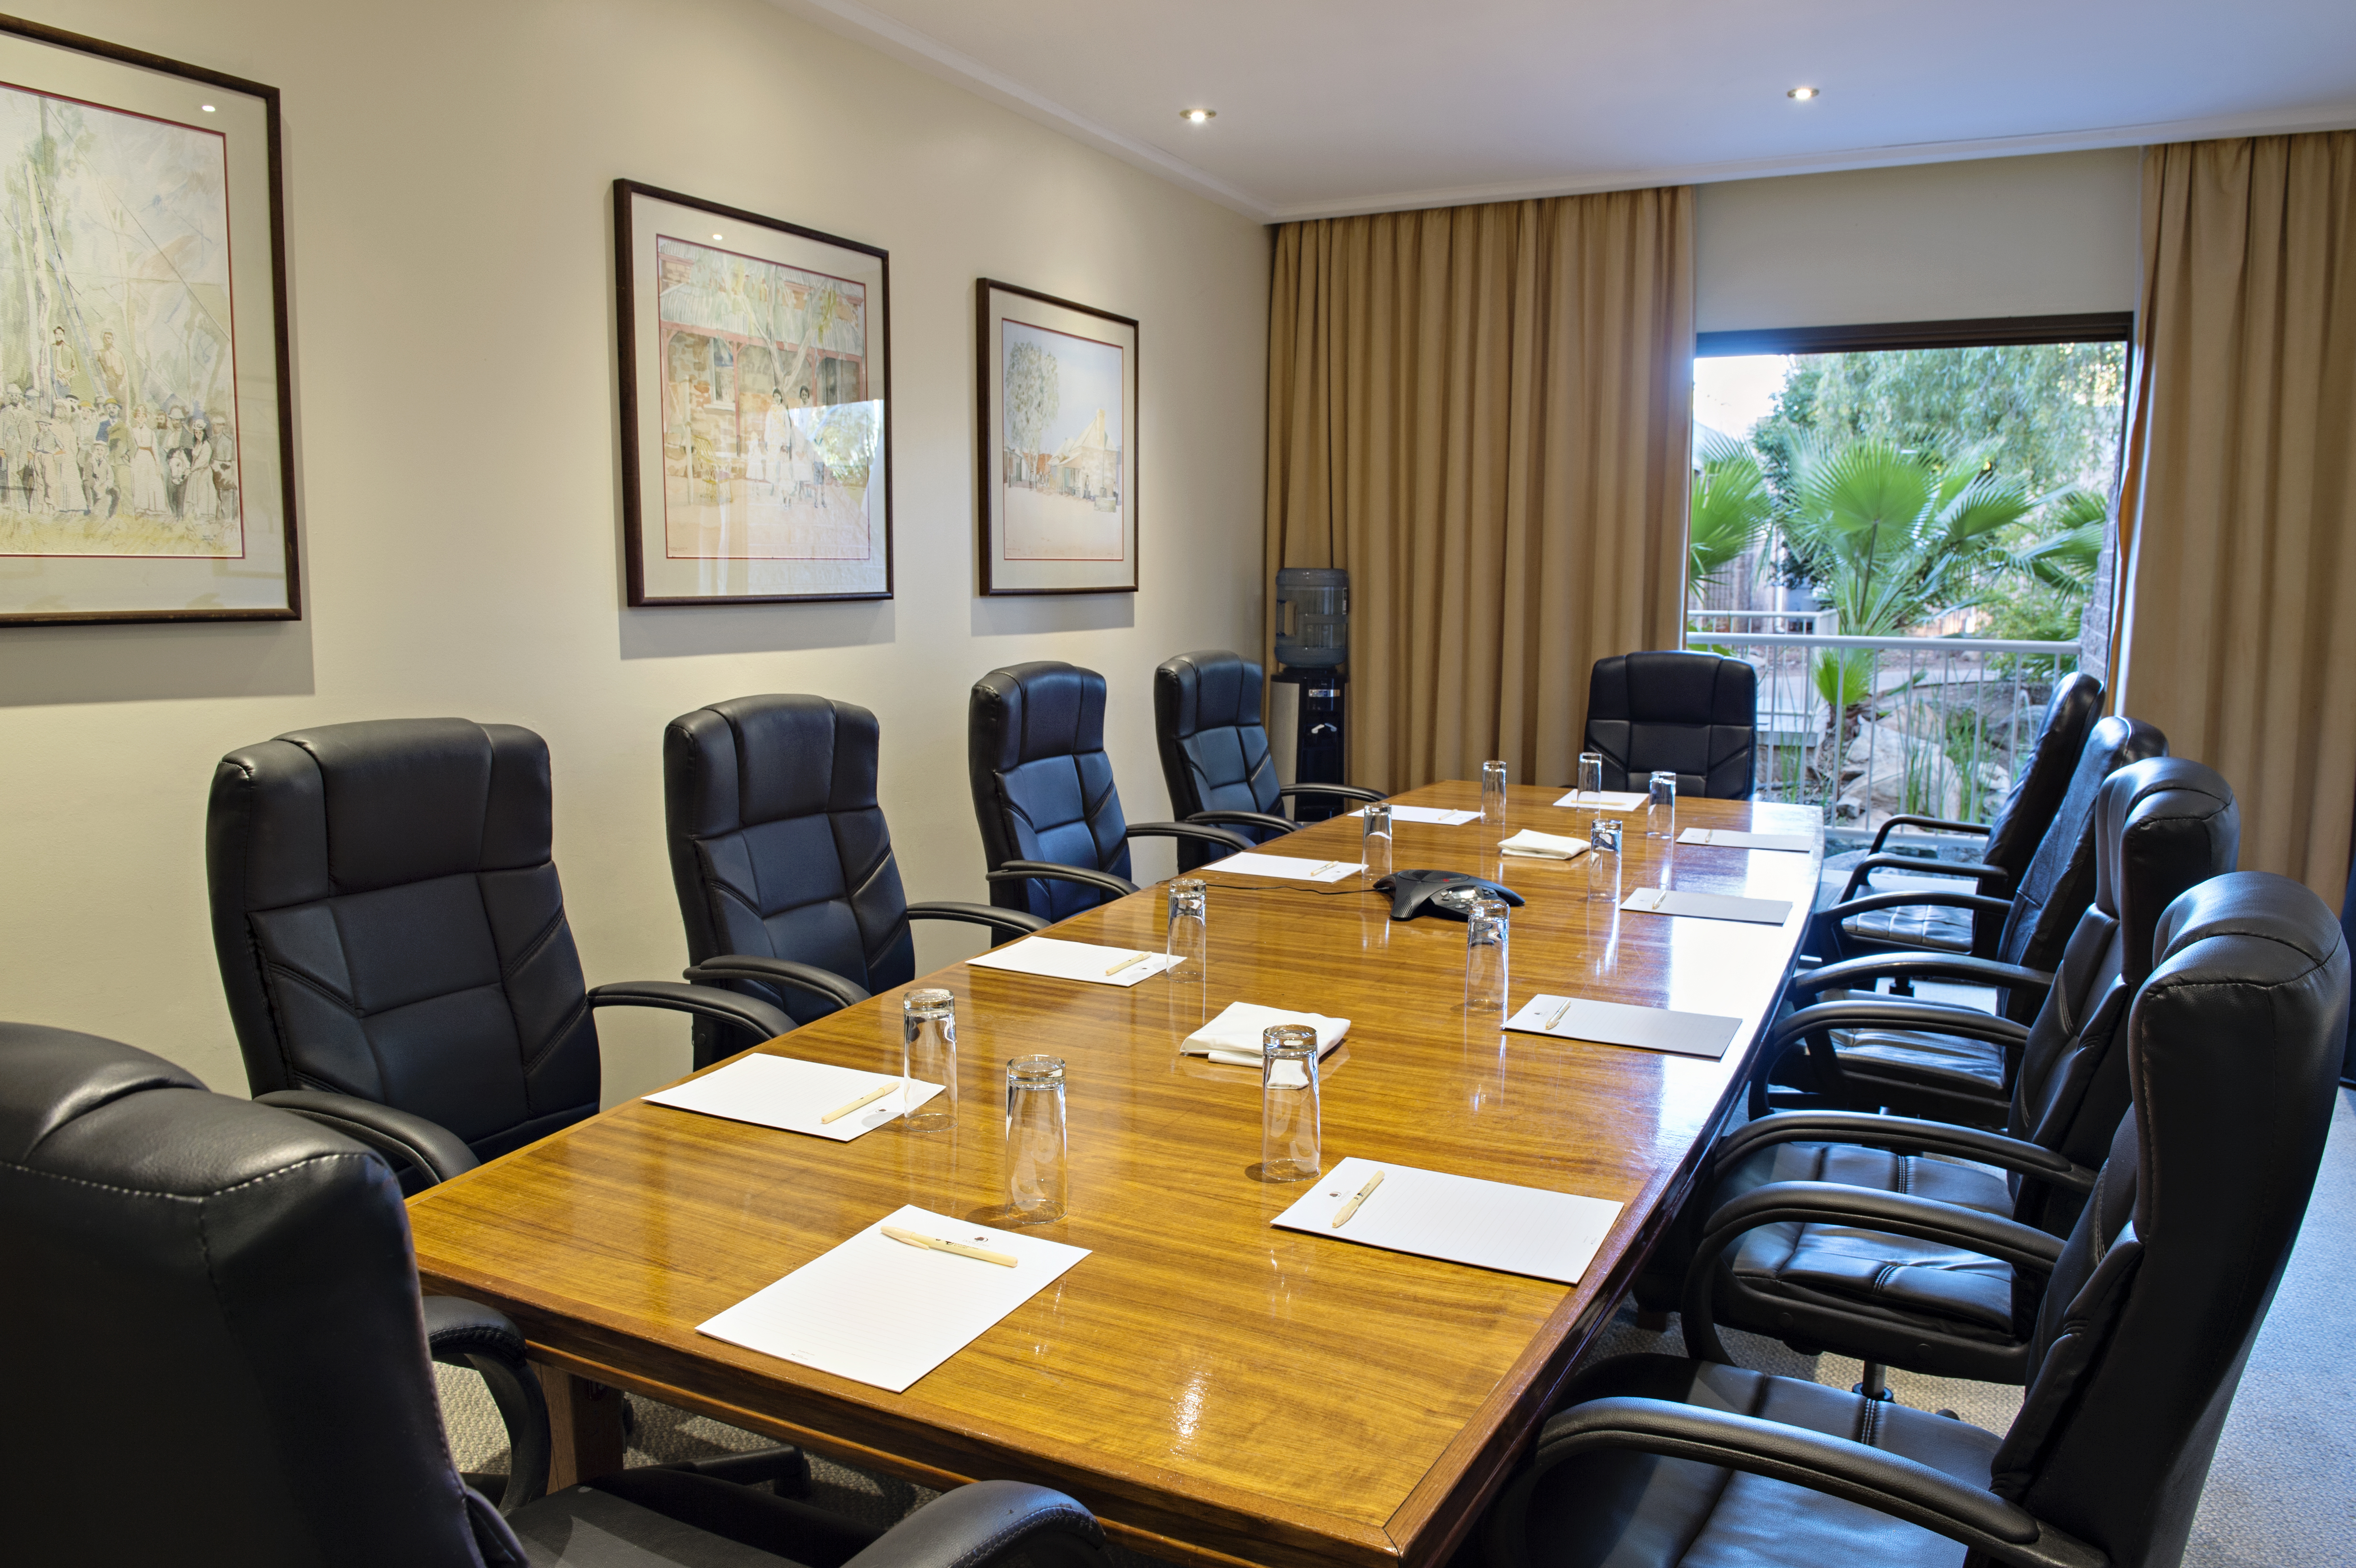 Seating for 10 Around Boardroom Table, Wall Art and Large Window With View